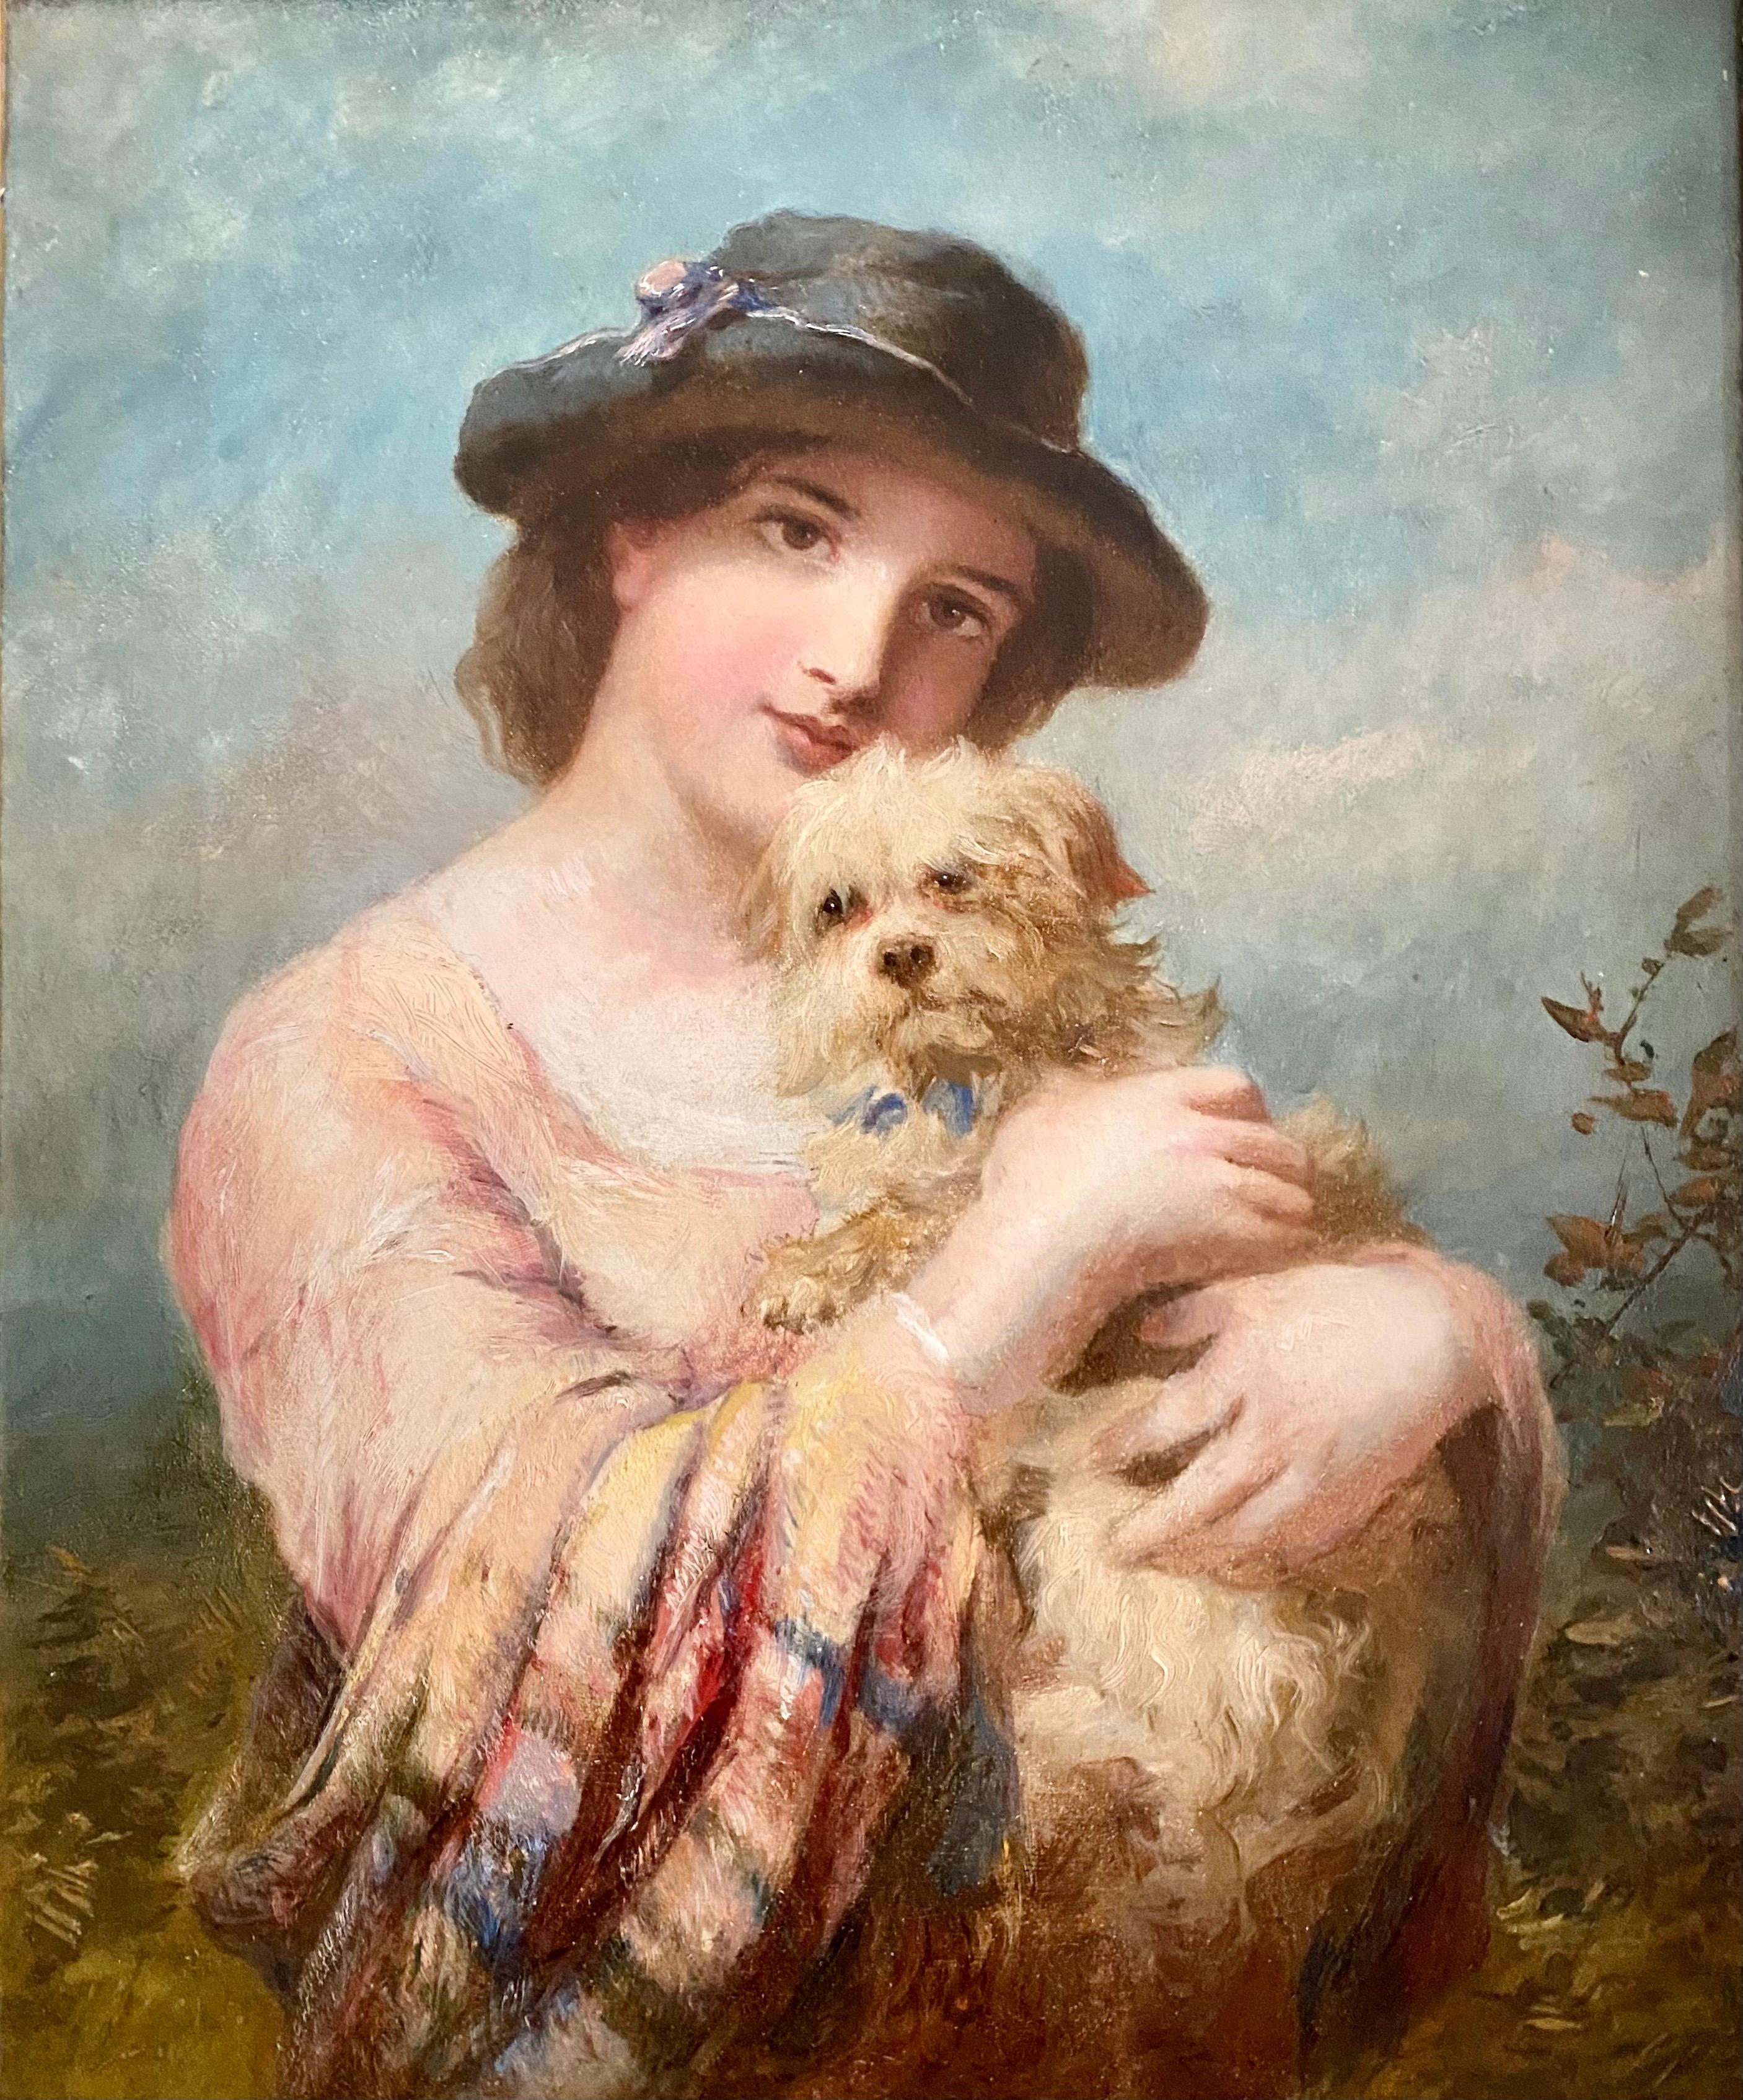 A superb quality painting by James John Hill Rba (1811 - 1882). This wonderful 19th century painting is of a beautiful lady with her dog. The lady looks very stylish in a hat holding her pet. The quality of this painting is 2nd to none. Both the dog